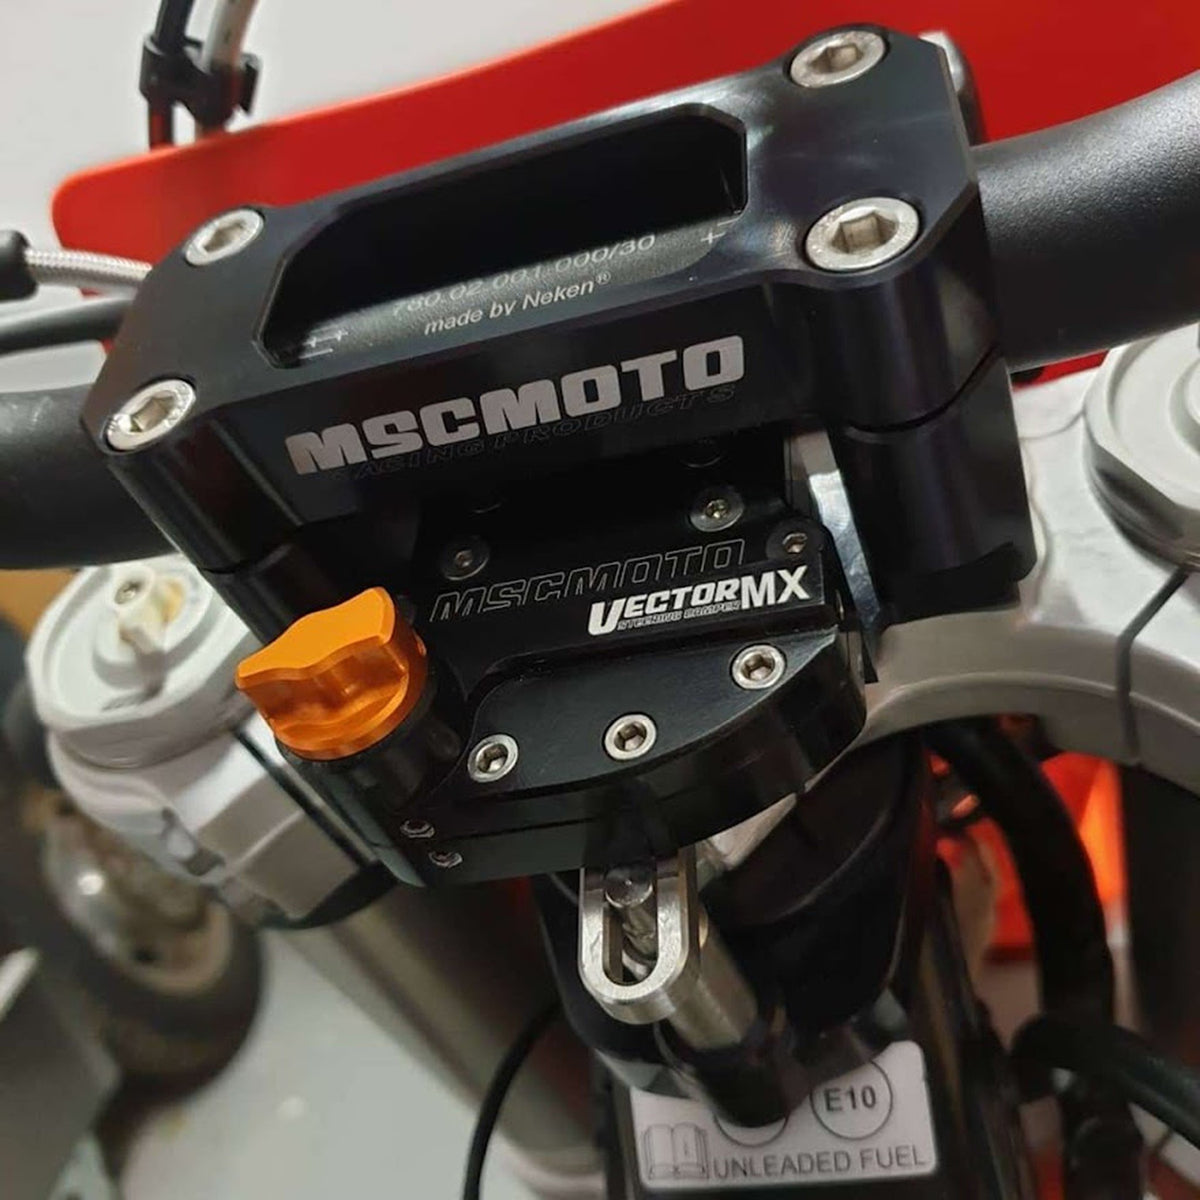 mscmotousa, VectorMX Steering Damper Kit &quot;Down Under&quot; Mount (VEC0011) - YAMAHA YZ250, VEC0011, vectormx, yamaha, yamaha-2013-yz250-esi7751076, , Imported and distributed in North &amp; South America by Lindeco Genuine Powersports.